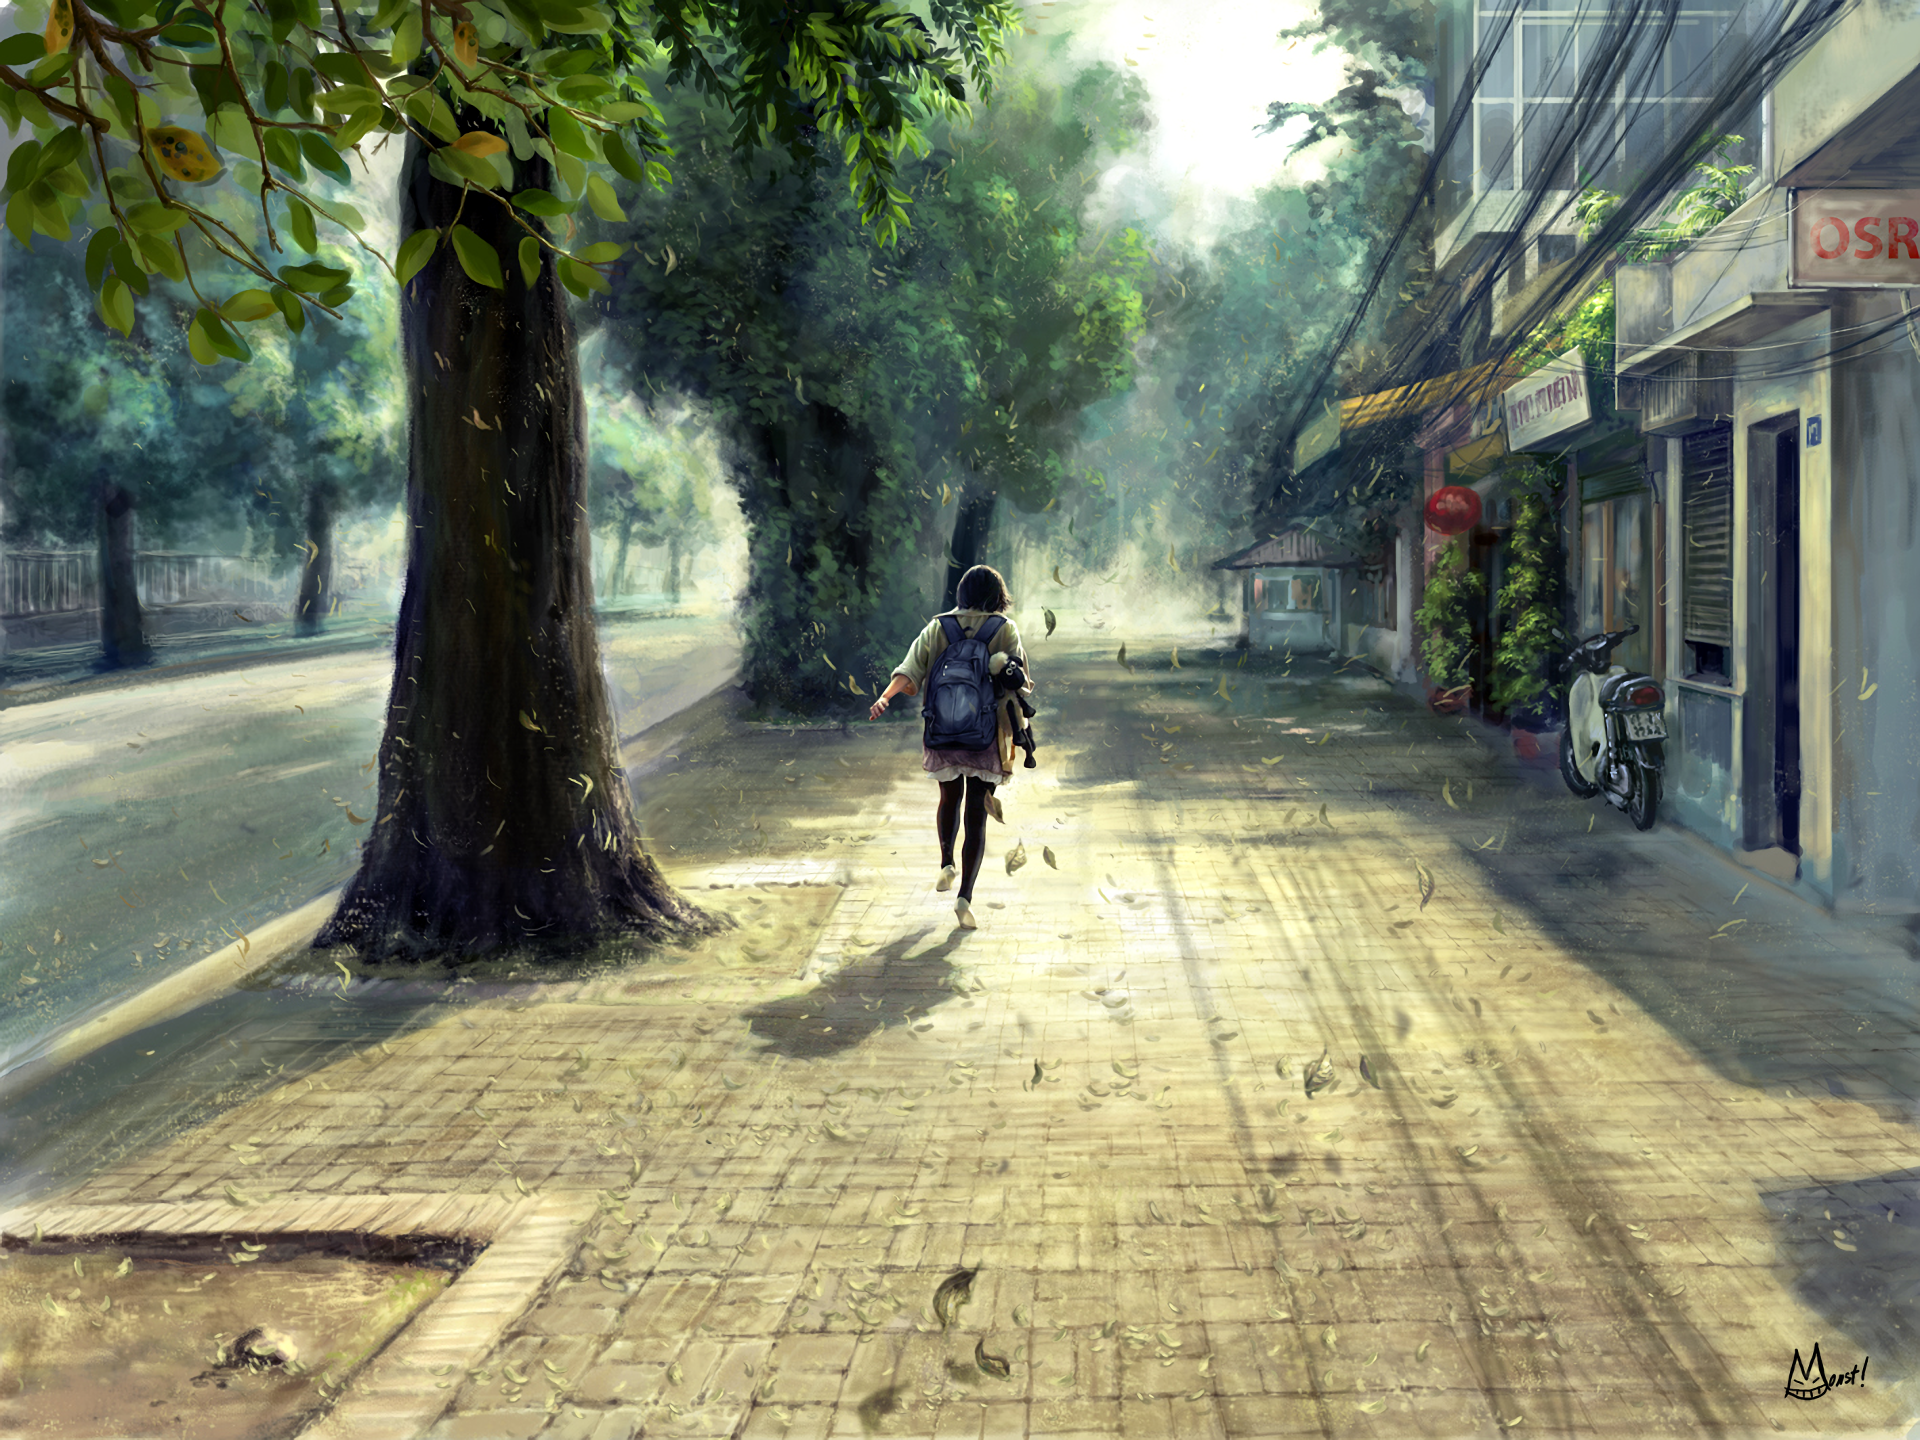 Android iOS Anime Street Live Wallpaper